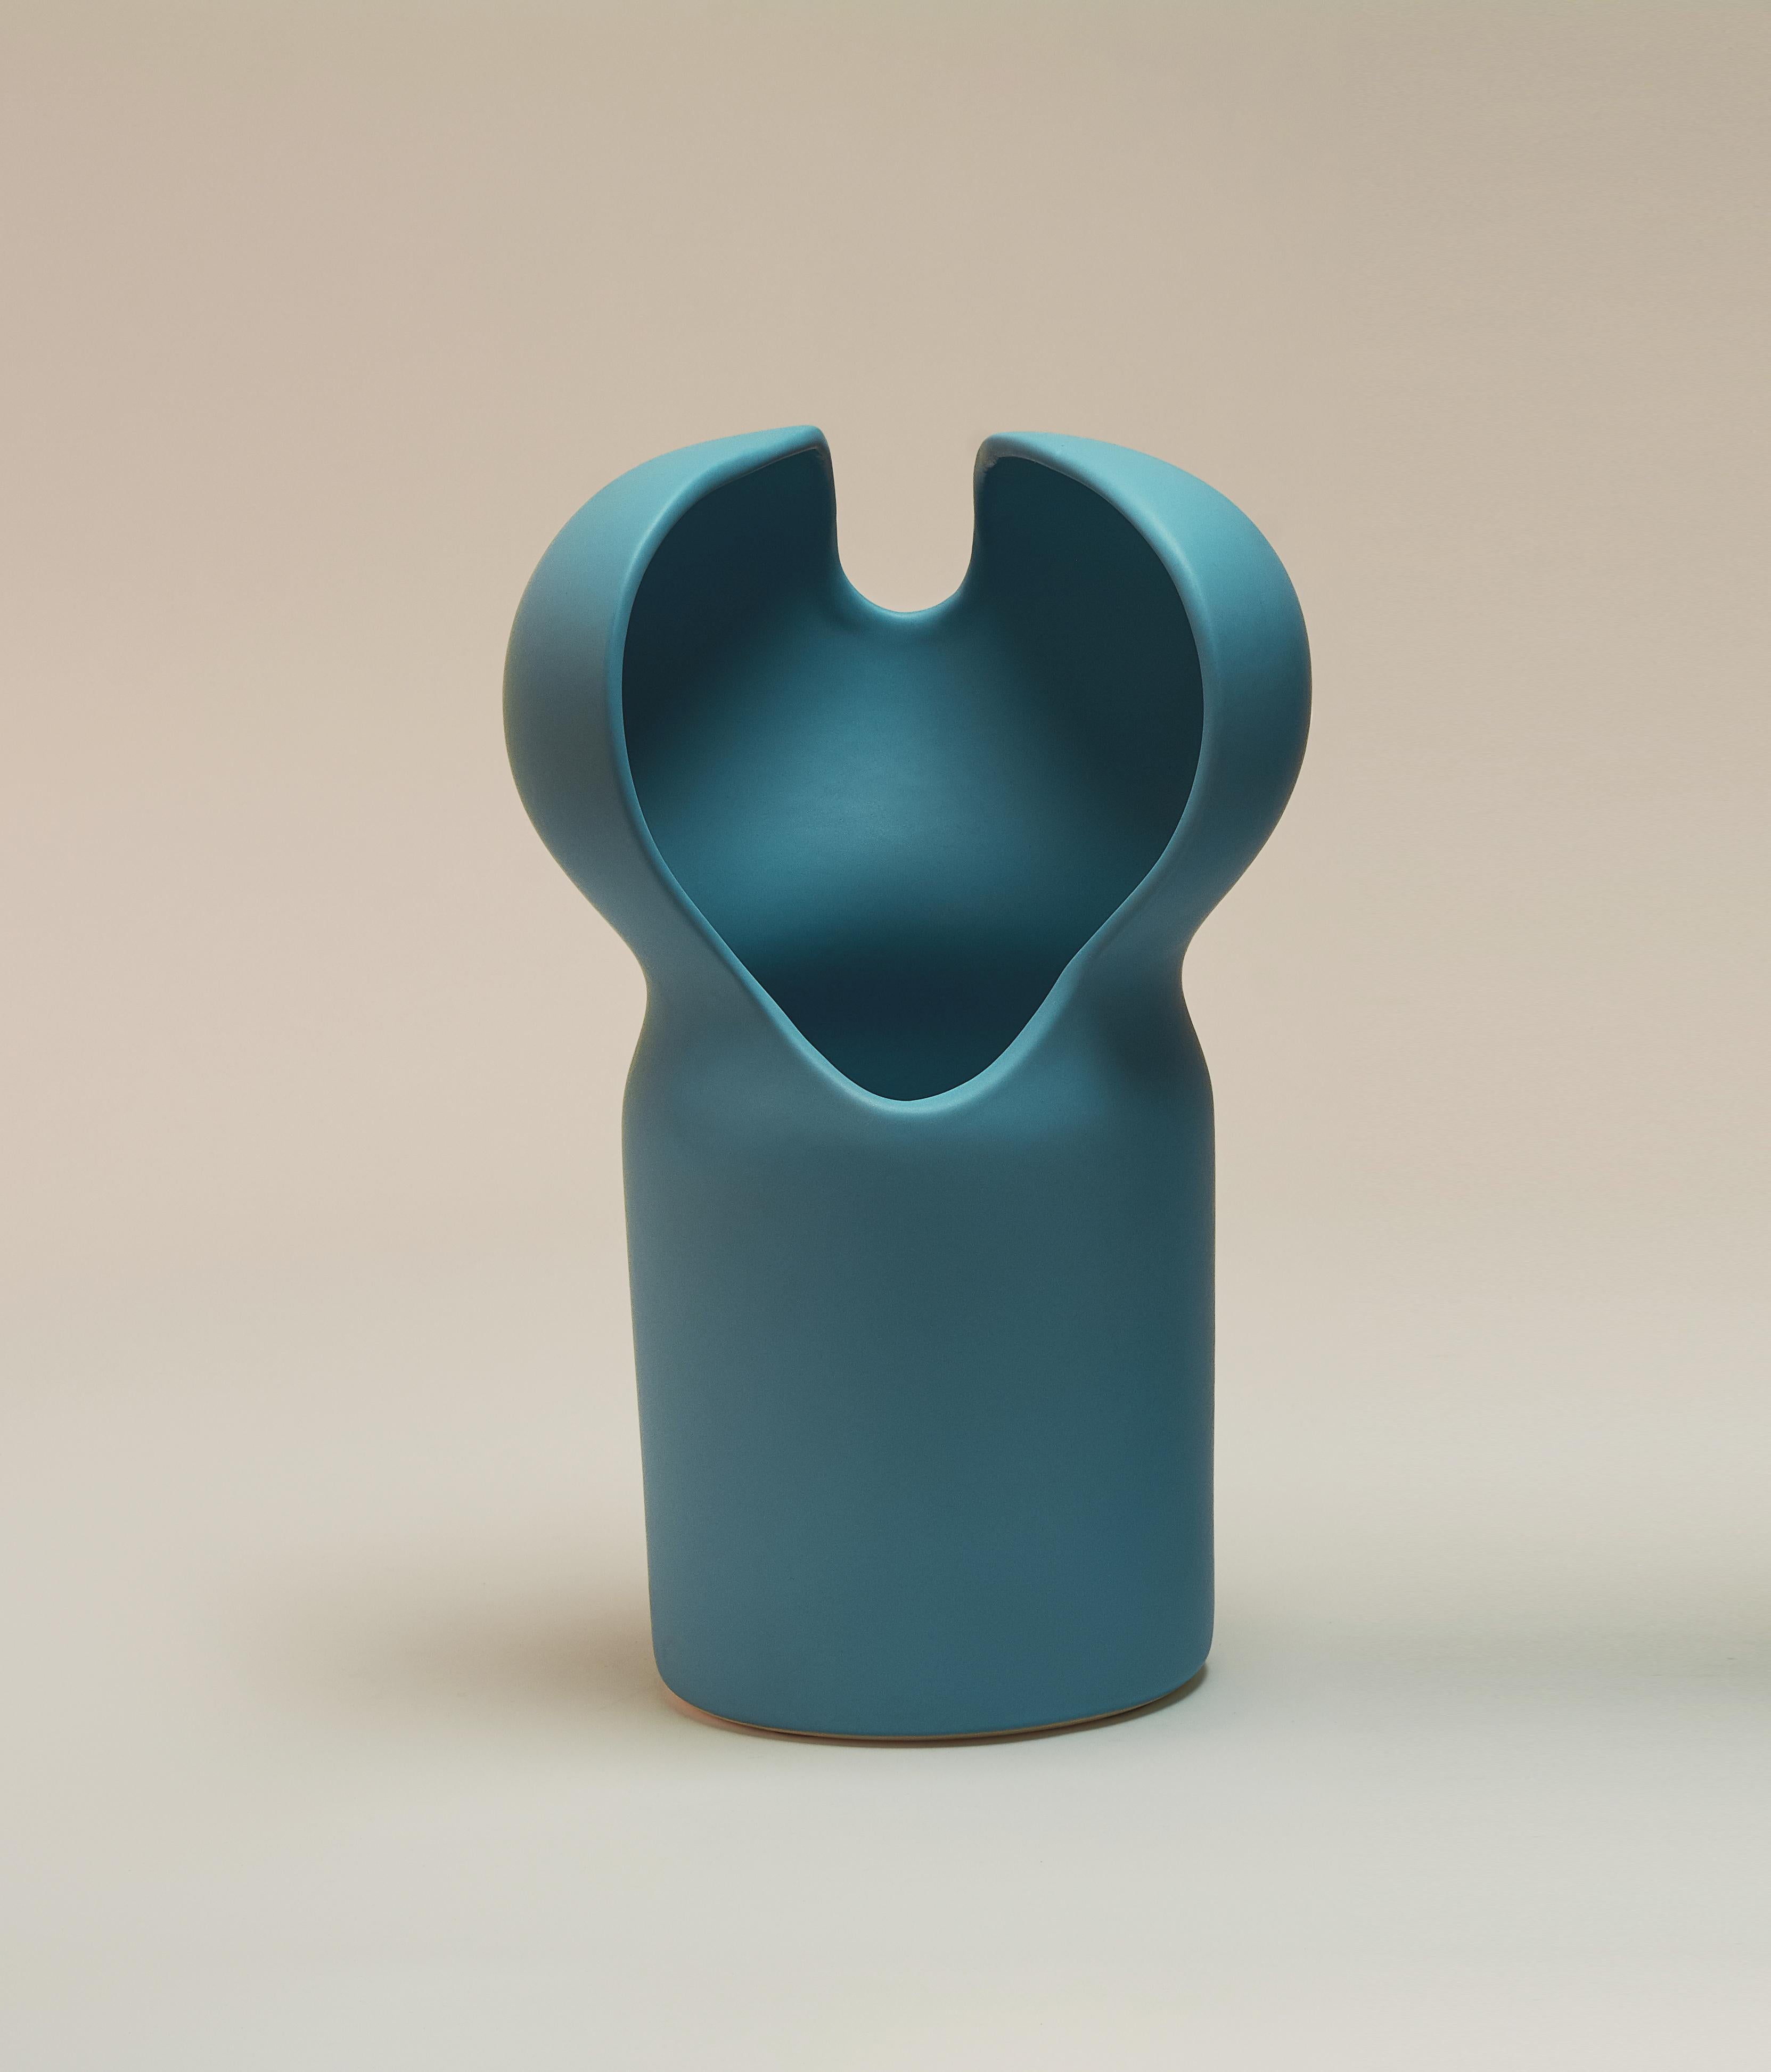 Floro vase by Lilia Cruz Corona Garduño
Dimensions: W 18 x D 18 x H 31 cm
Materials: High-temperature ceramics (Stoneware) and vitrified glaze

Platalea studio was born out of a passion for both art and design. We love how both are so